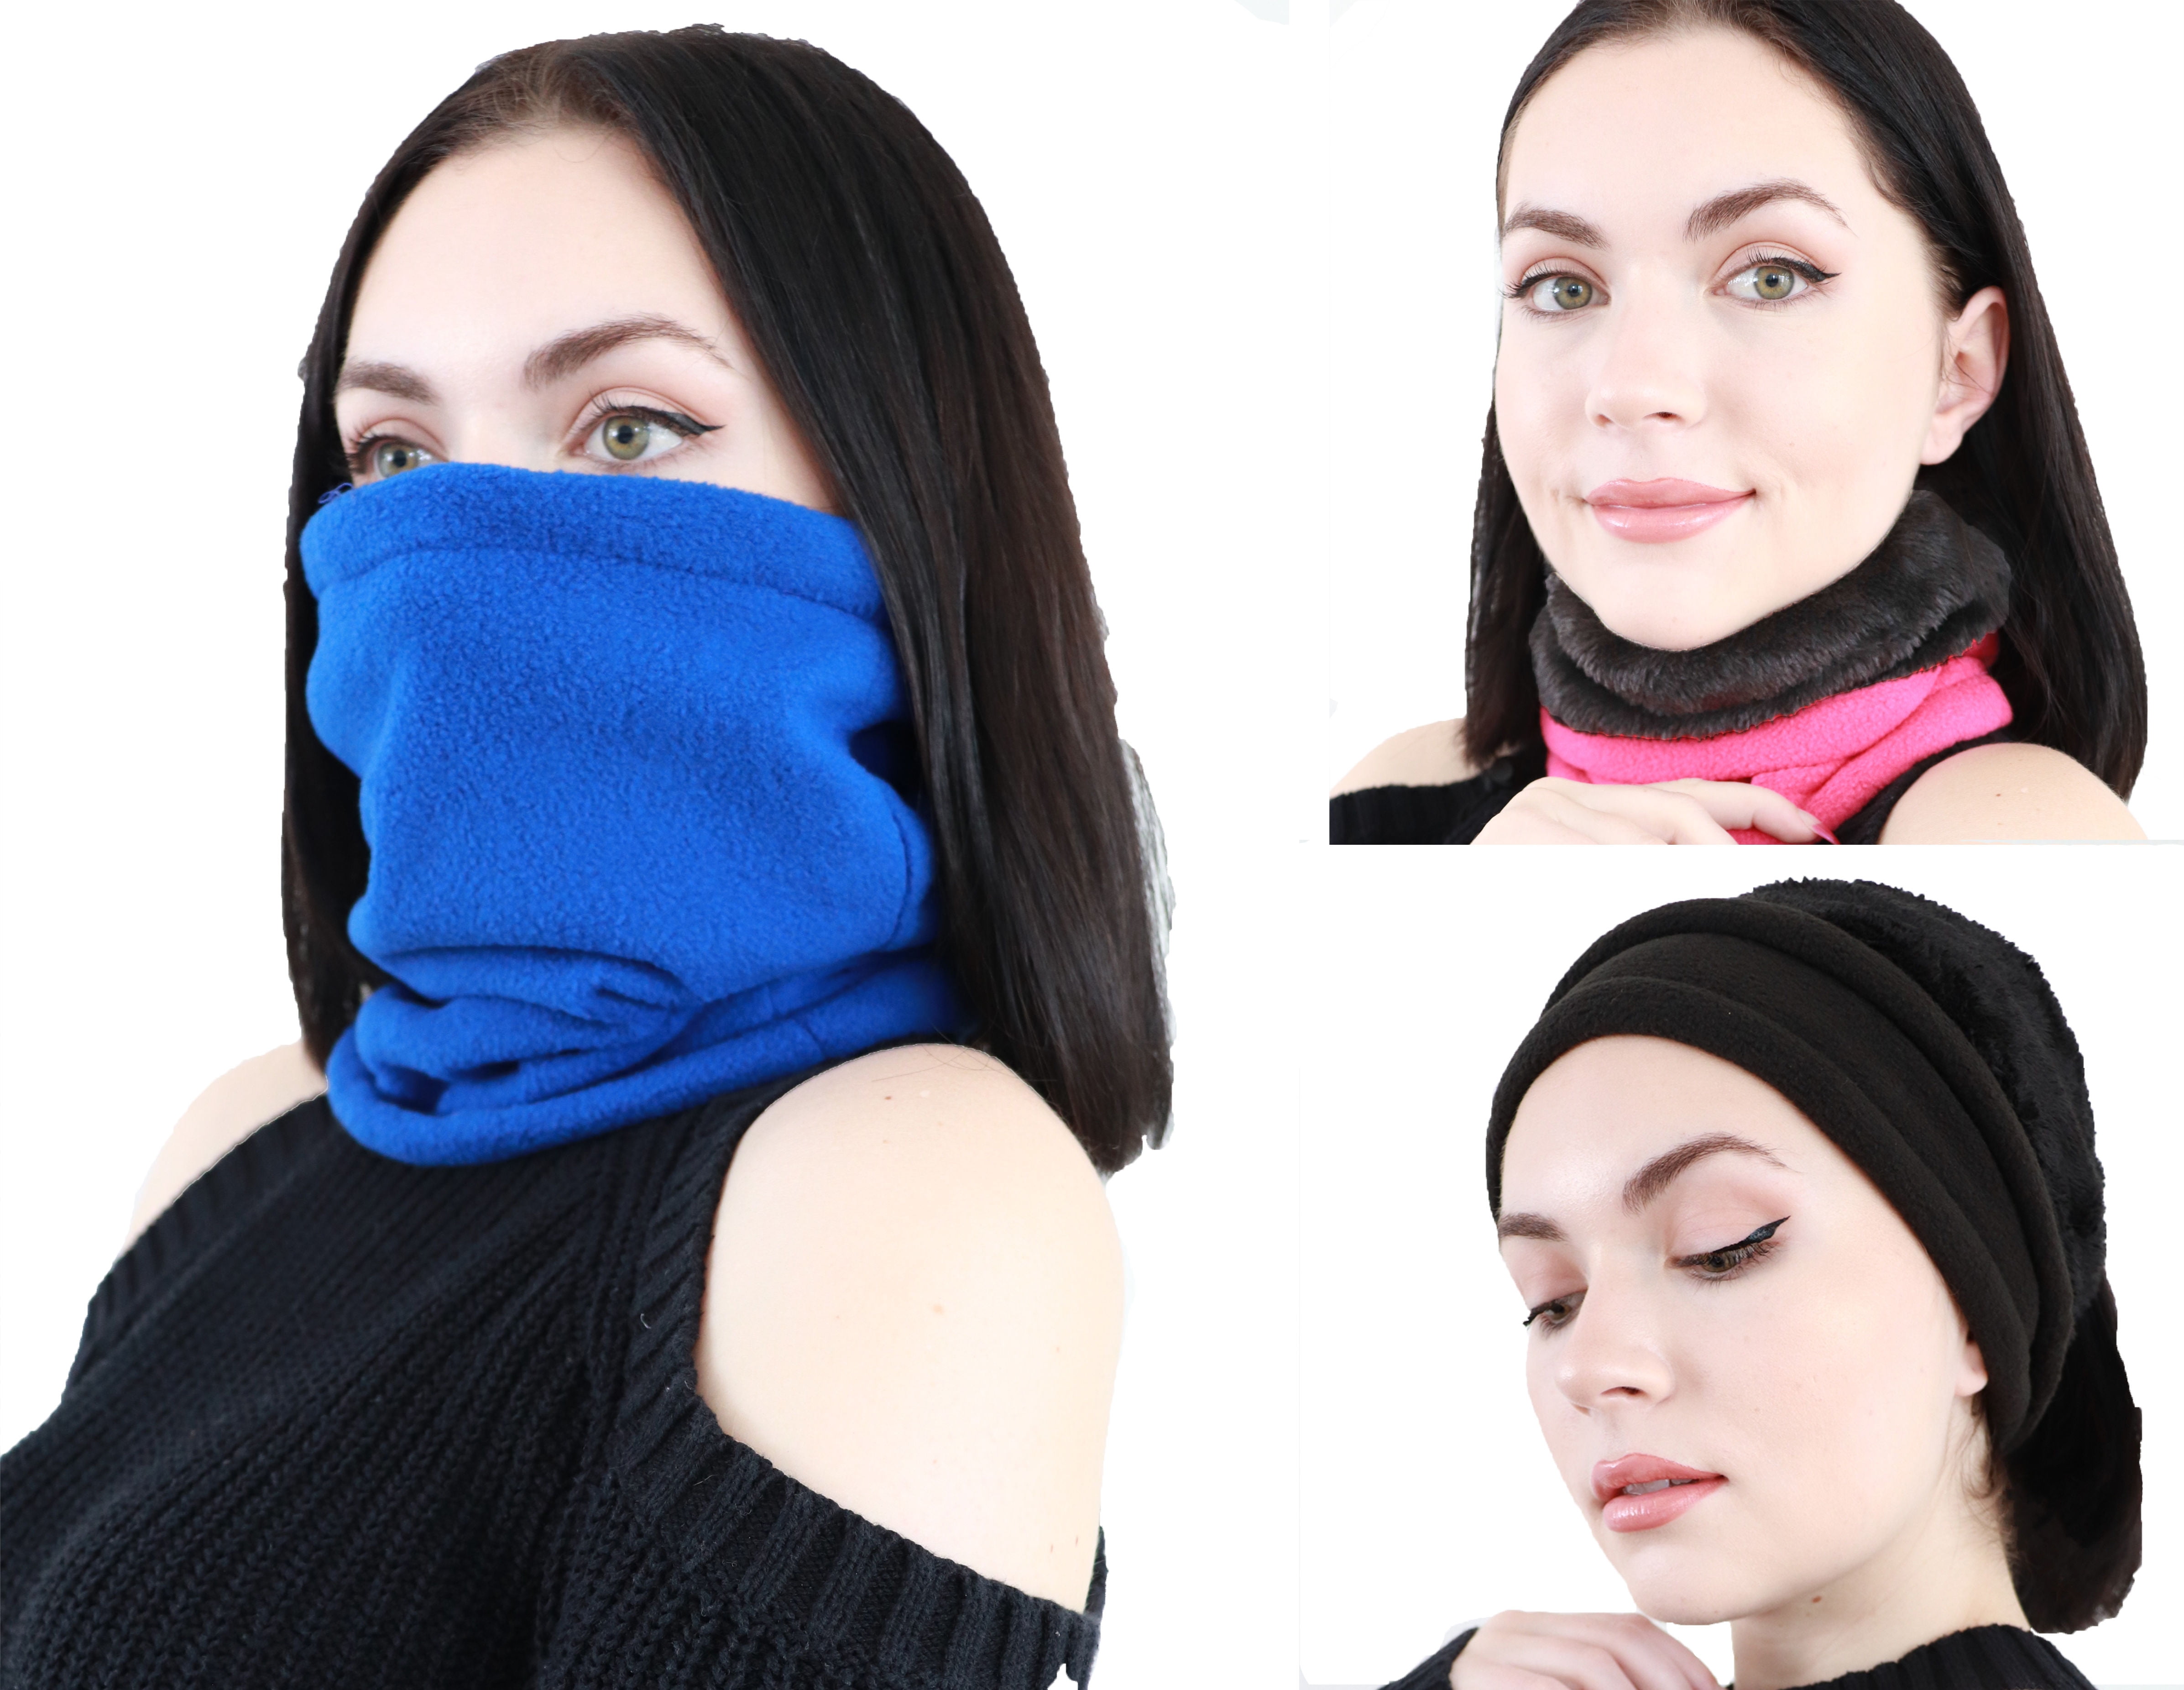 Unisex Polar Fleece Neck Warmer Scarf Multifunctional Wind Stopper Half Face Warm Mask Hood Lightweight Thermal Ski Wear Mask for Outdoors Work Sports Snowboarding Running Cycling Motorcycle Hiking 